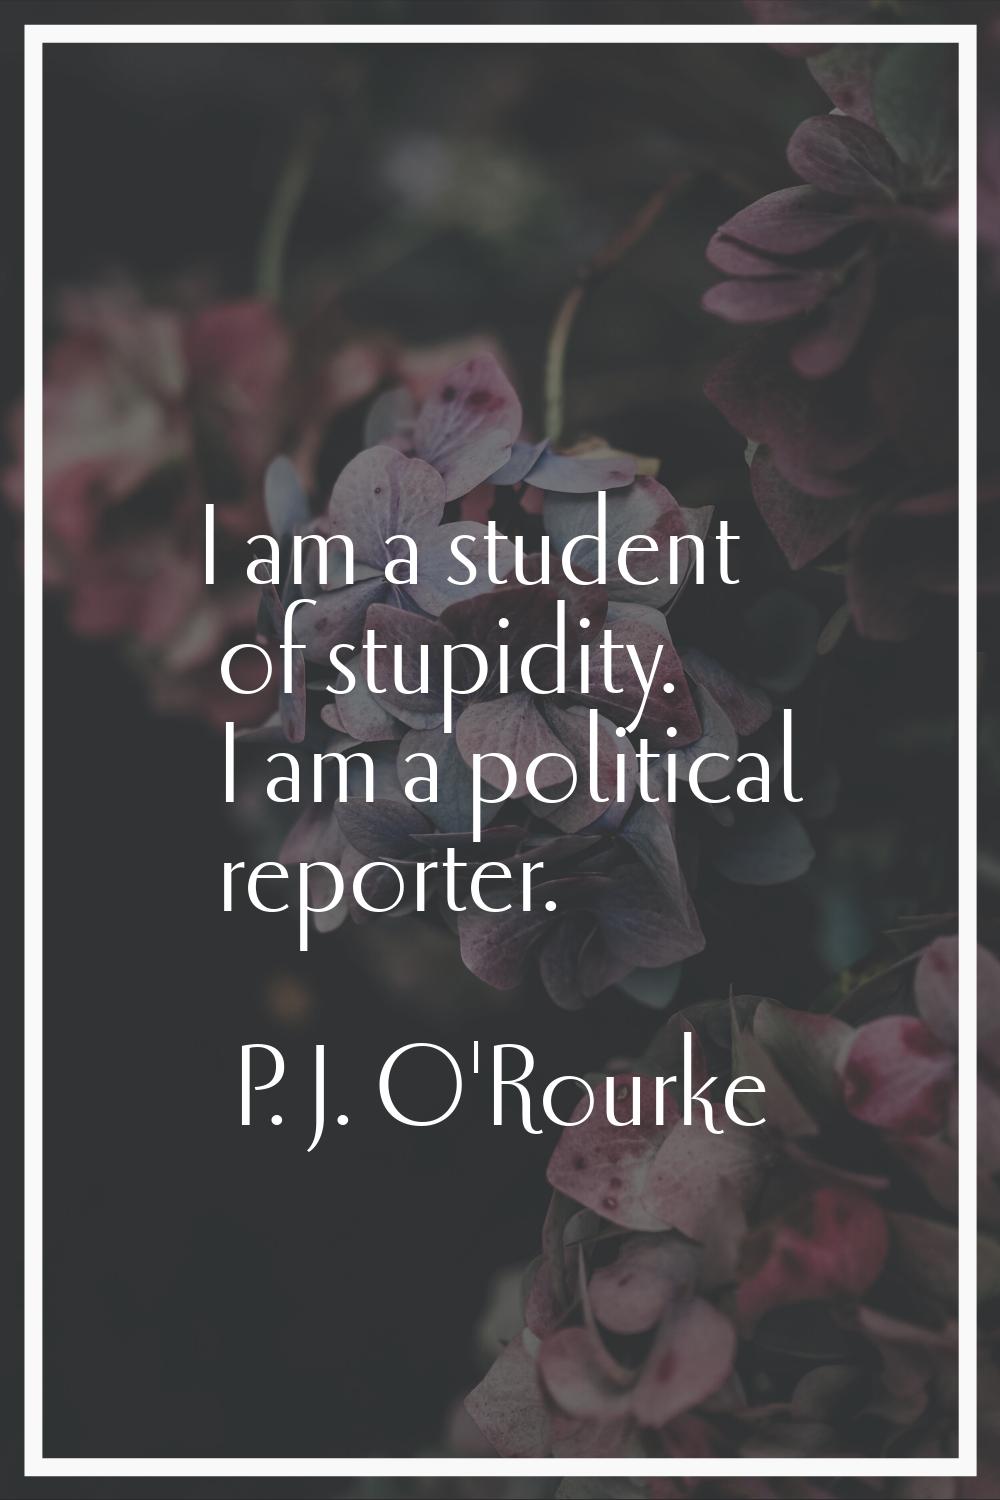 I am a student of stupidity. I am a political reporter.